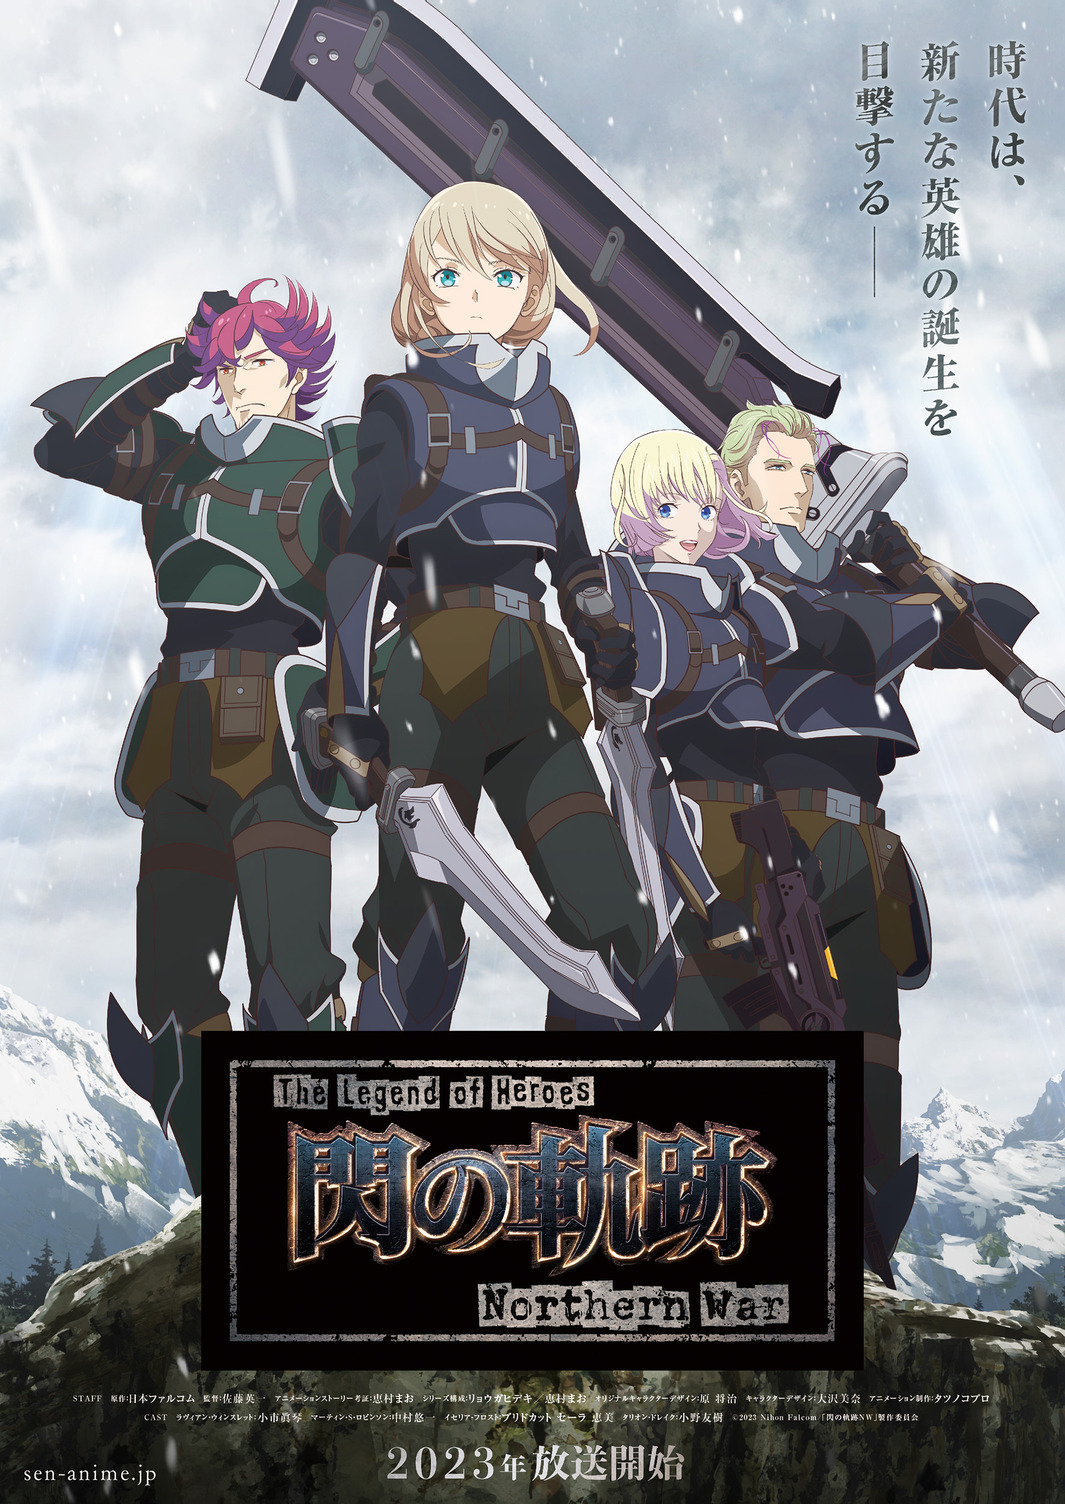 The Legend of Heroes: Trails of Cold Steel - Northern War anime key visual